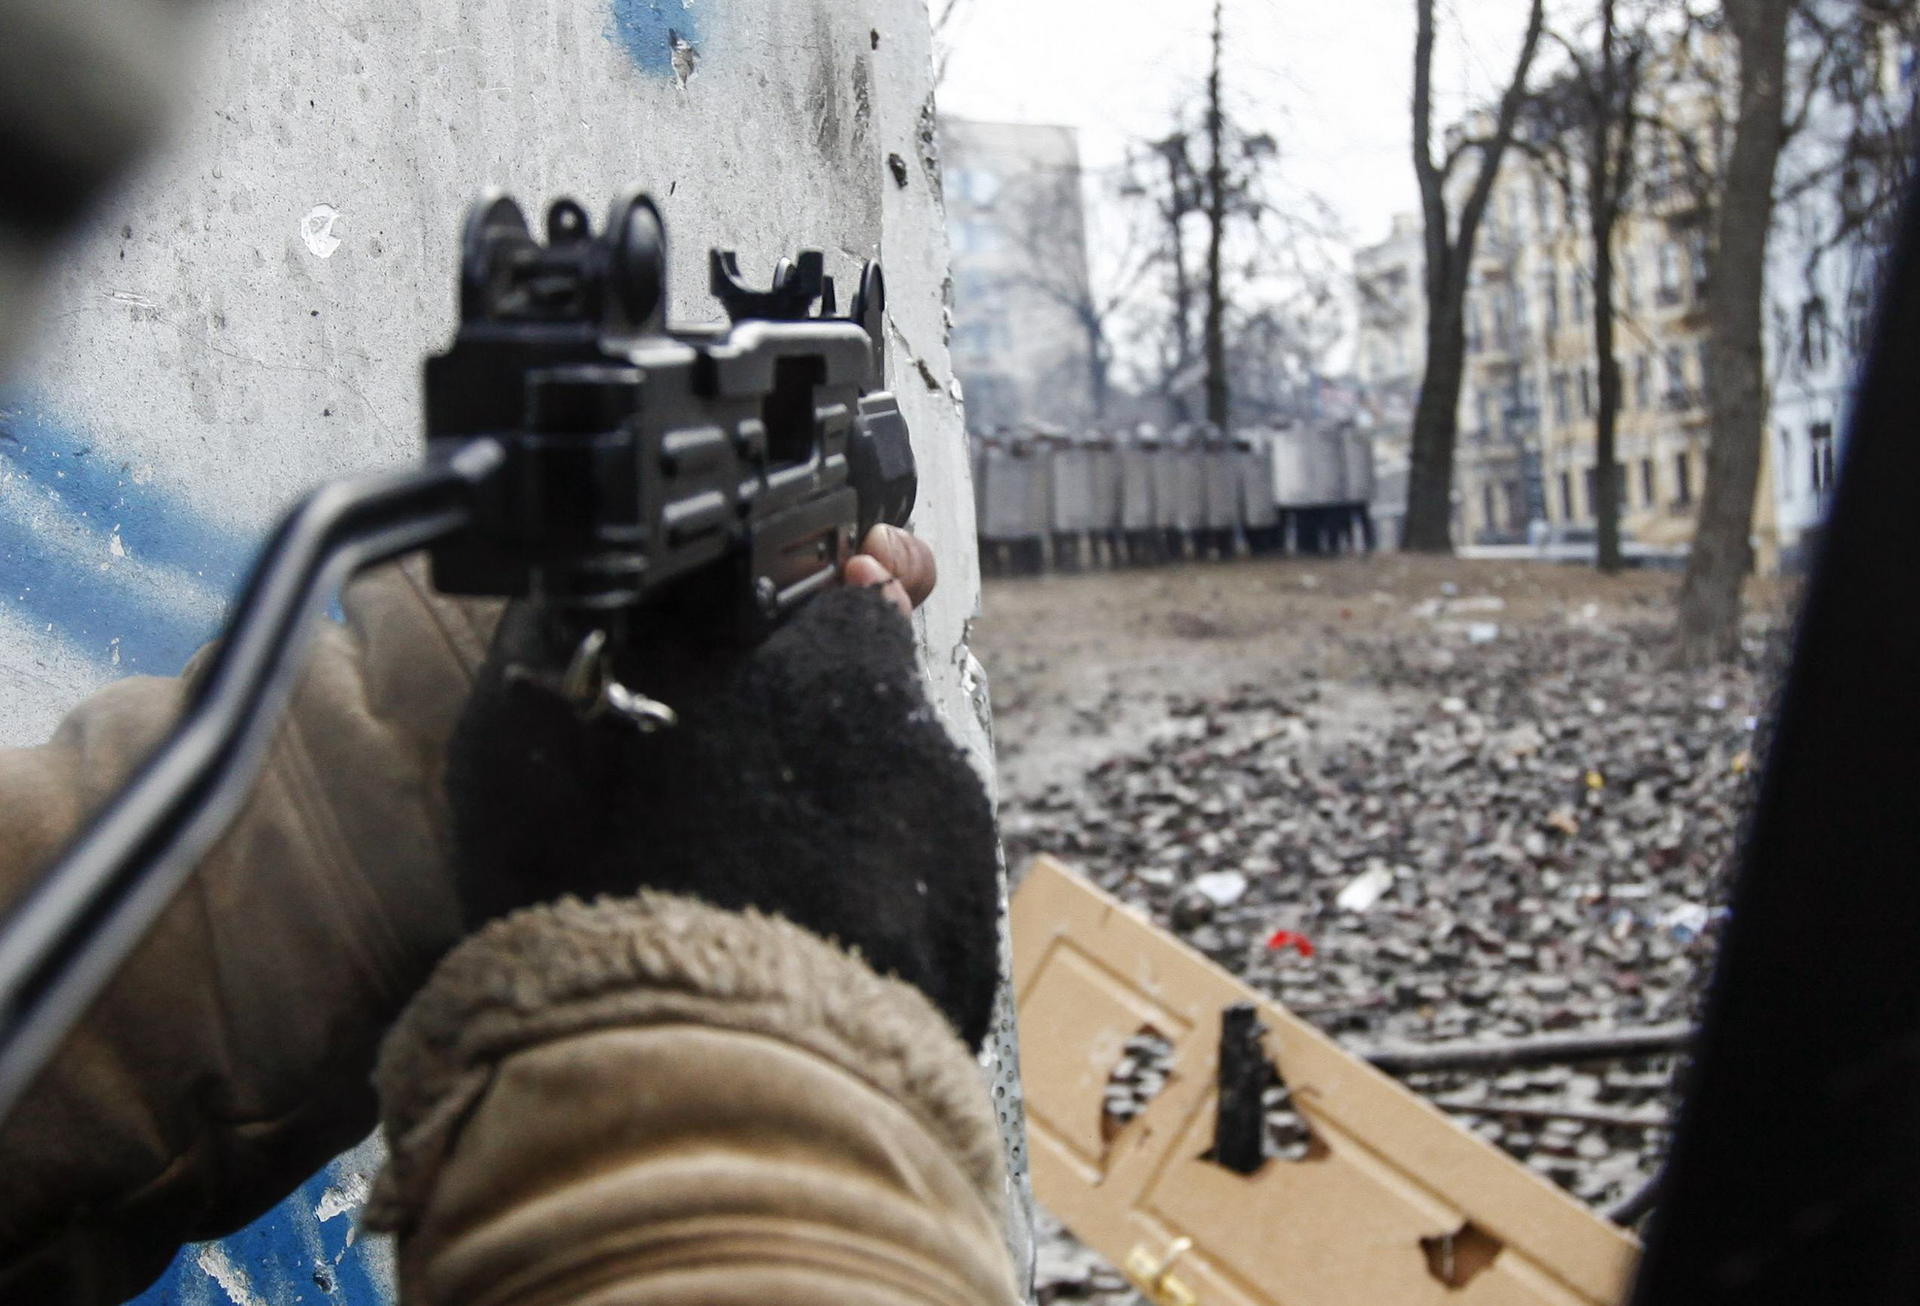 A protester aims a pneumatic gun at police in Kiev. Photo: Reuters